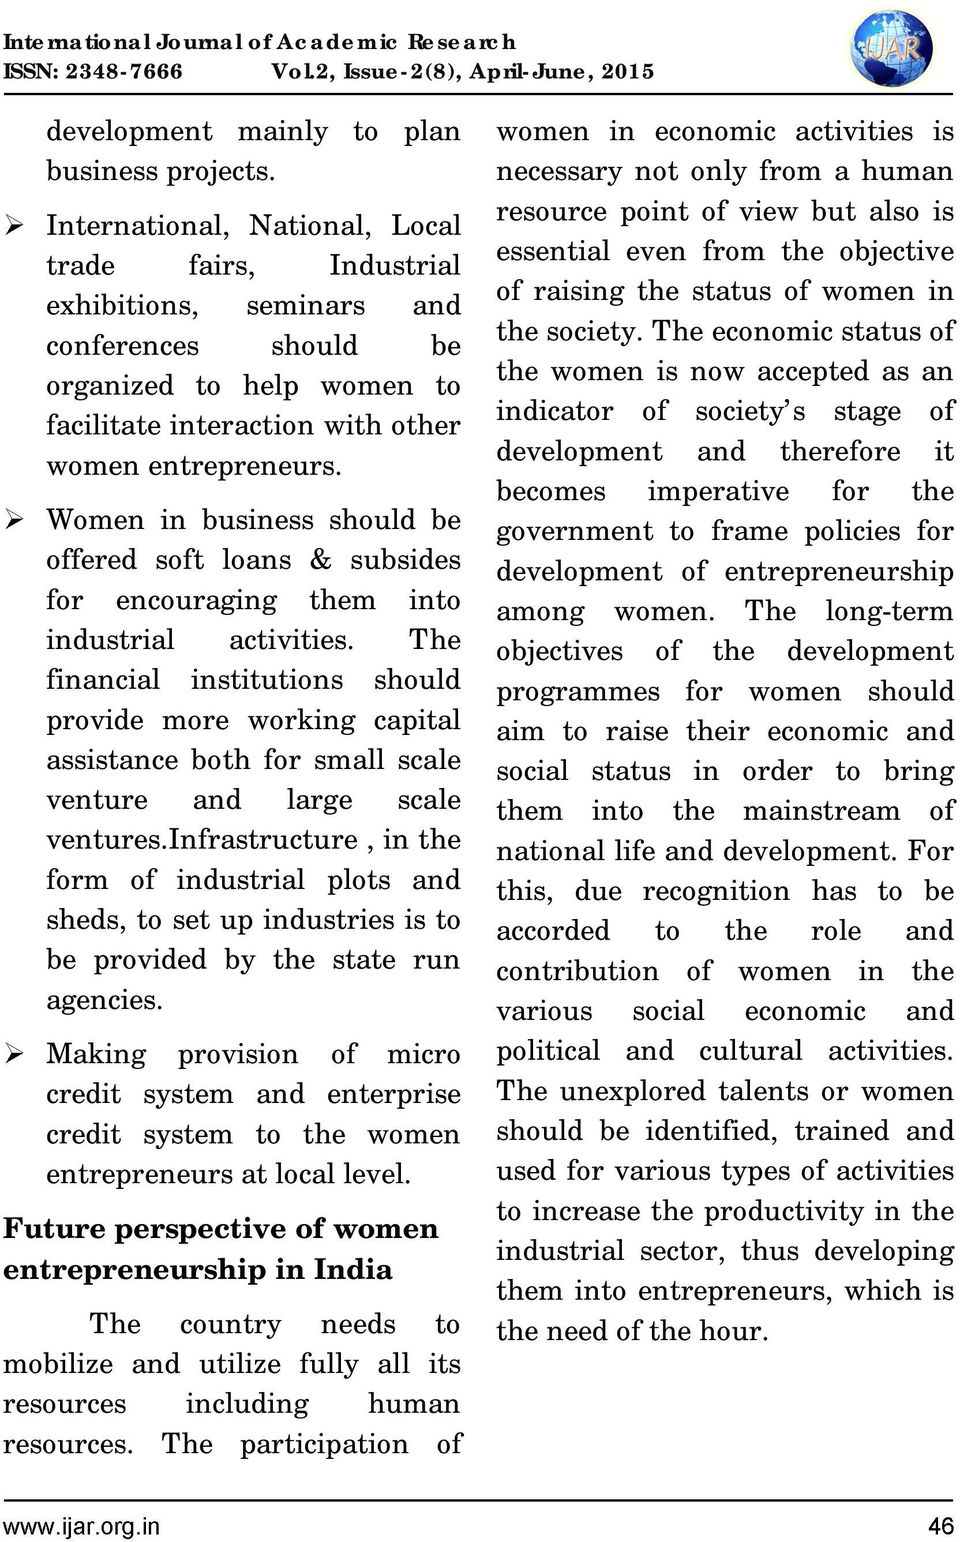 Women in business should be offered soft loans & subsides for encouraging them into industrial activities.